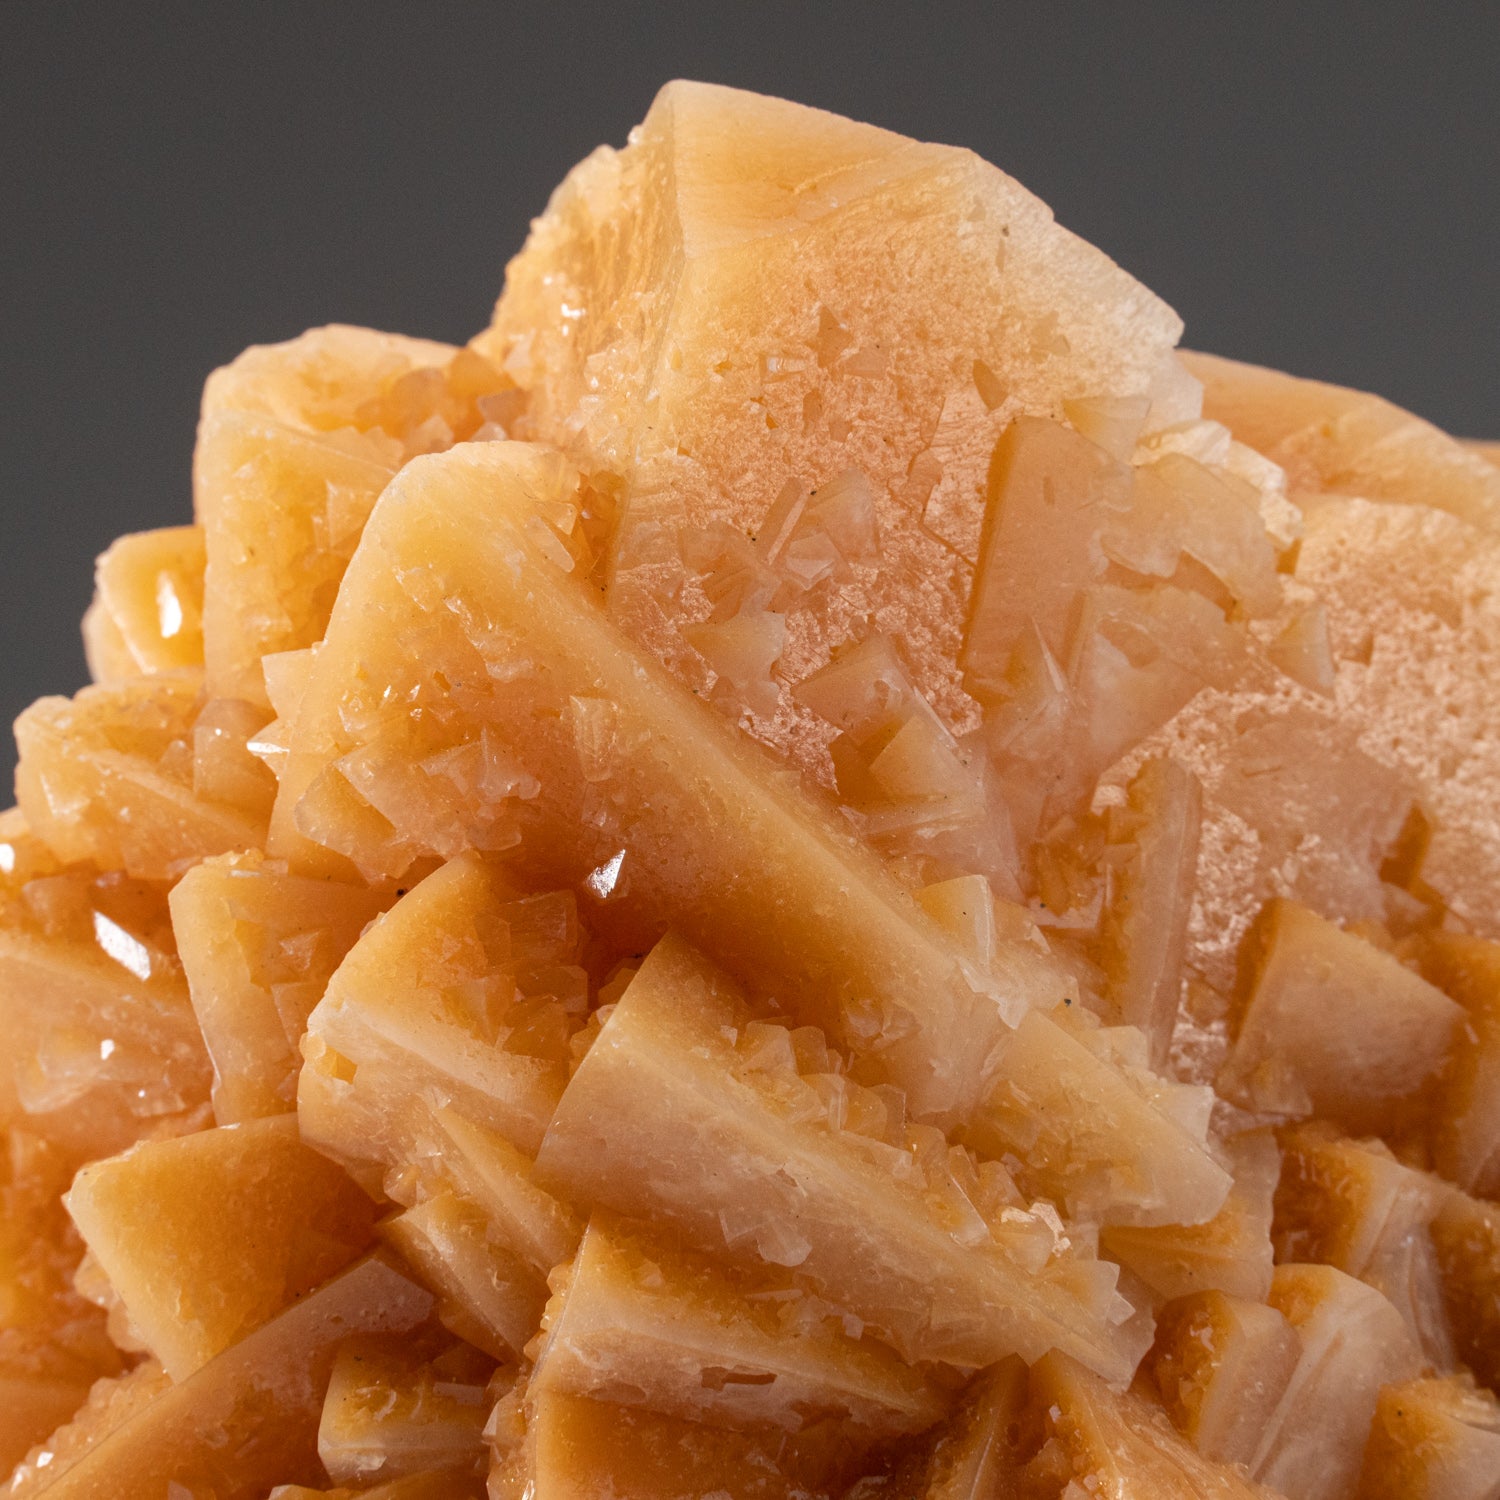 Yellow Calcite Crystal from Elmwood Mine, Tennessee